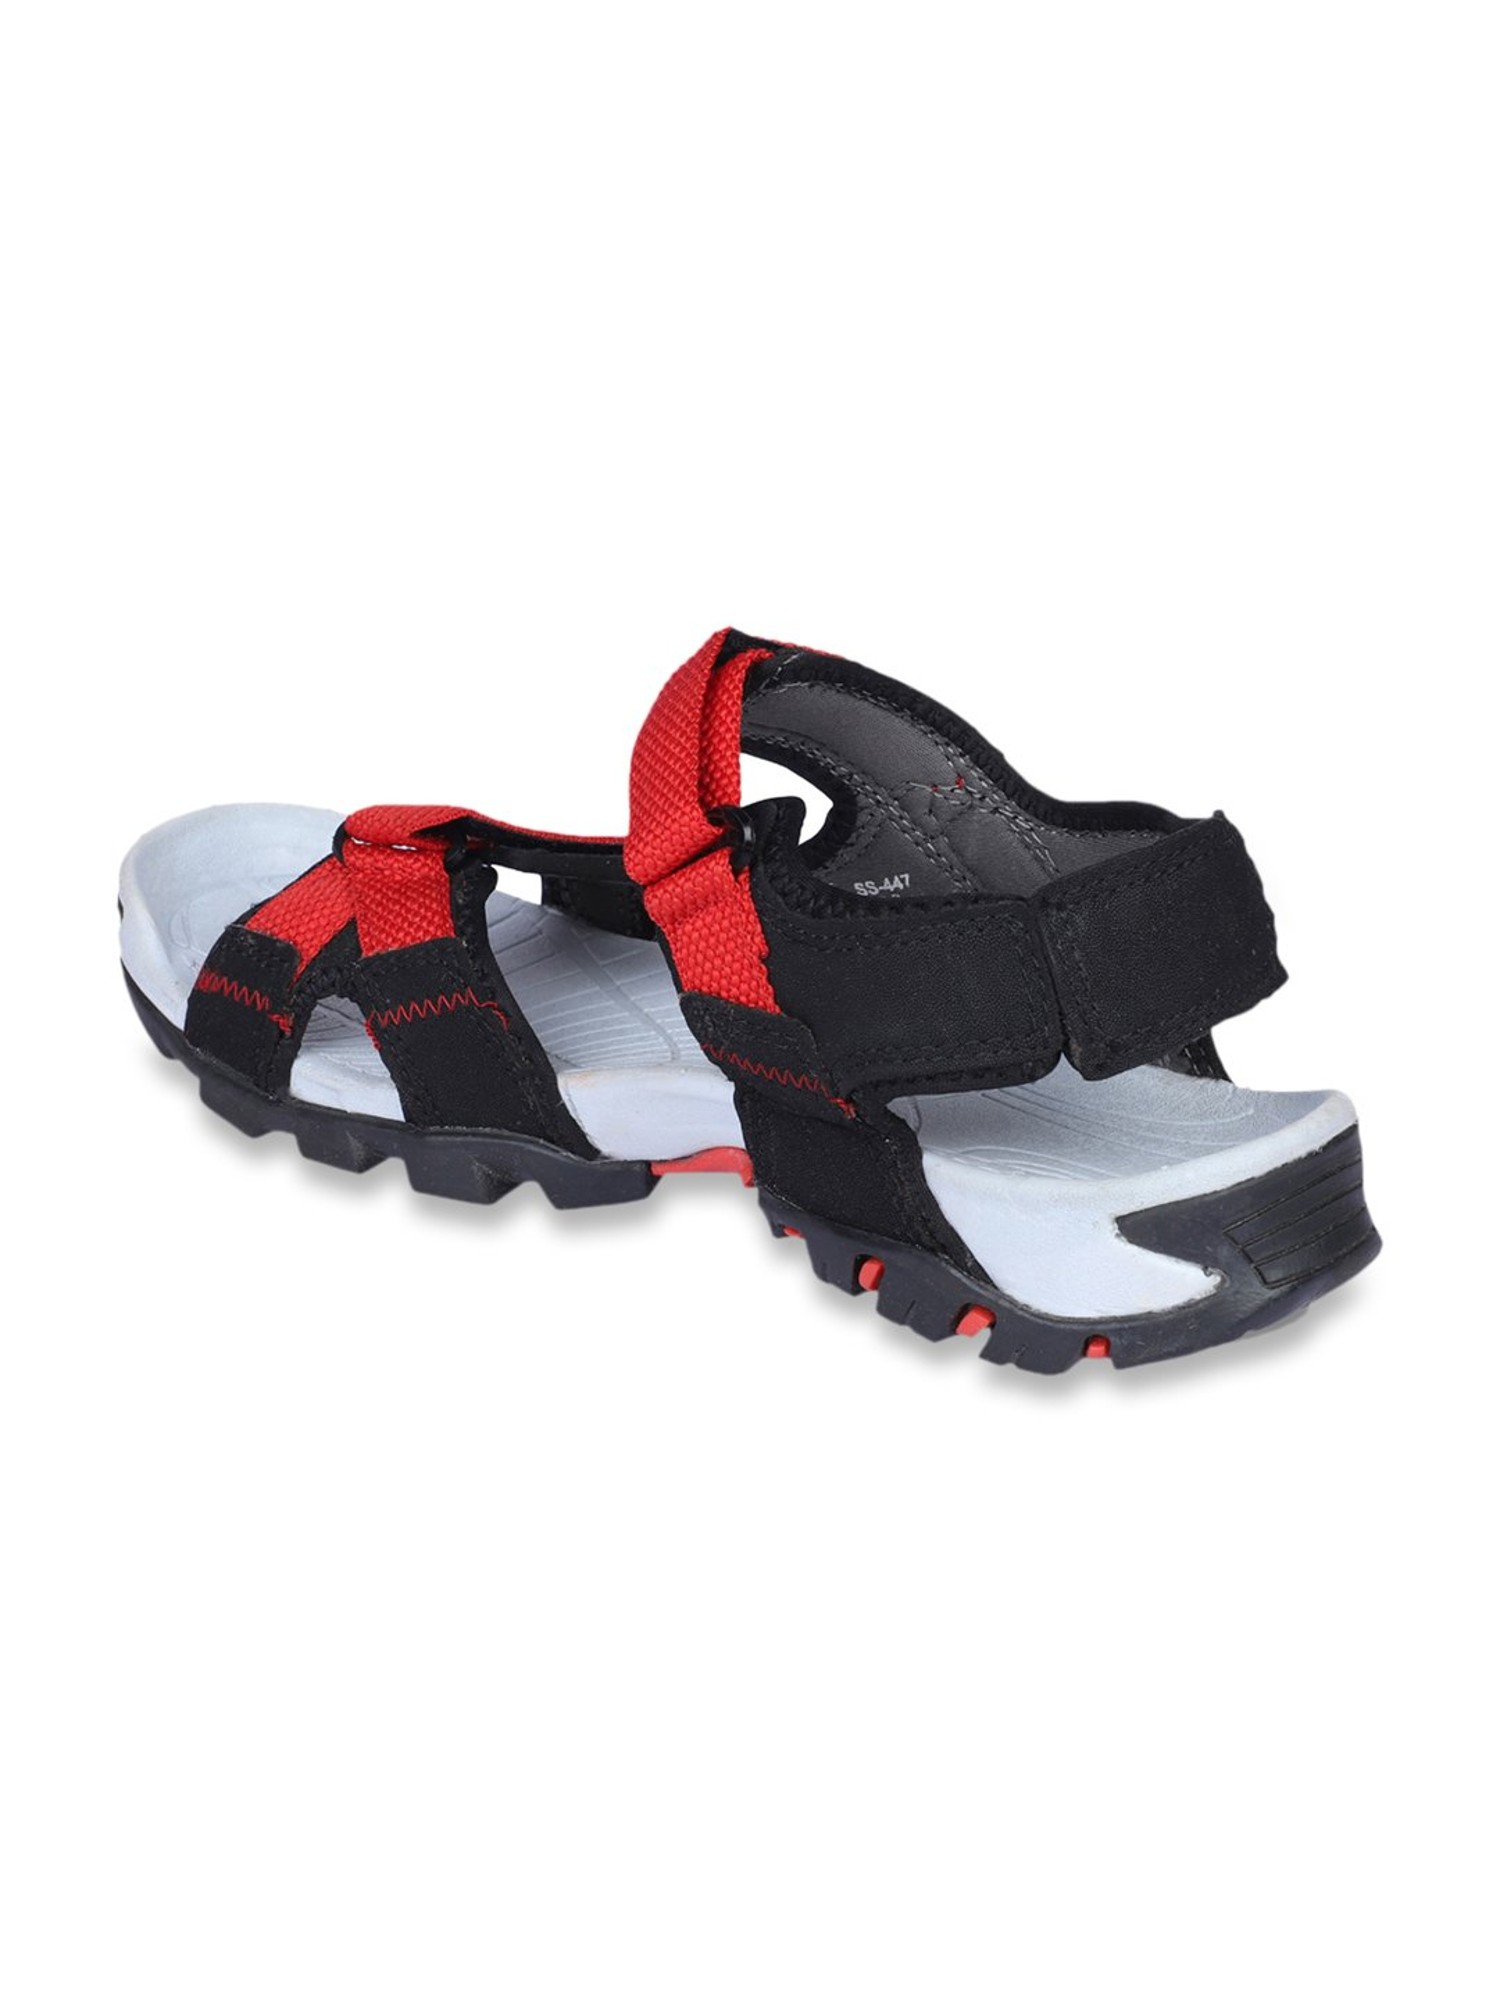 Sparx Men SS-447 Black Red Floater Sandals (SS0447G_BKRD_0007) : Amazon.in:  Fashion